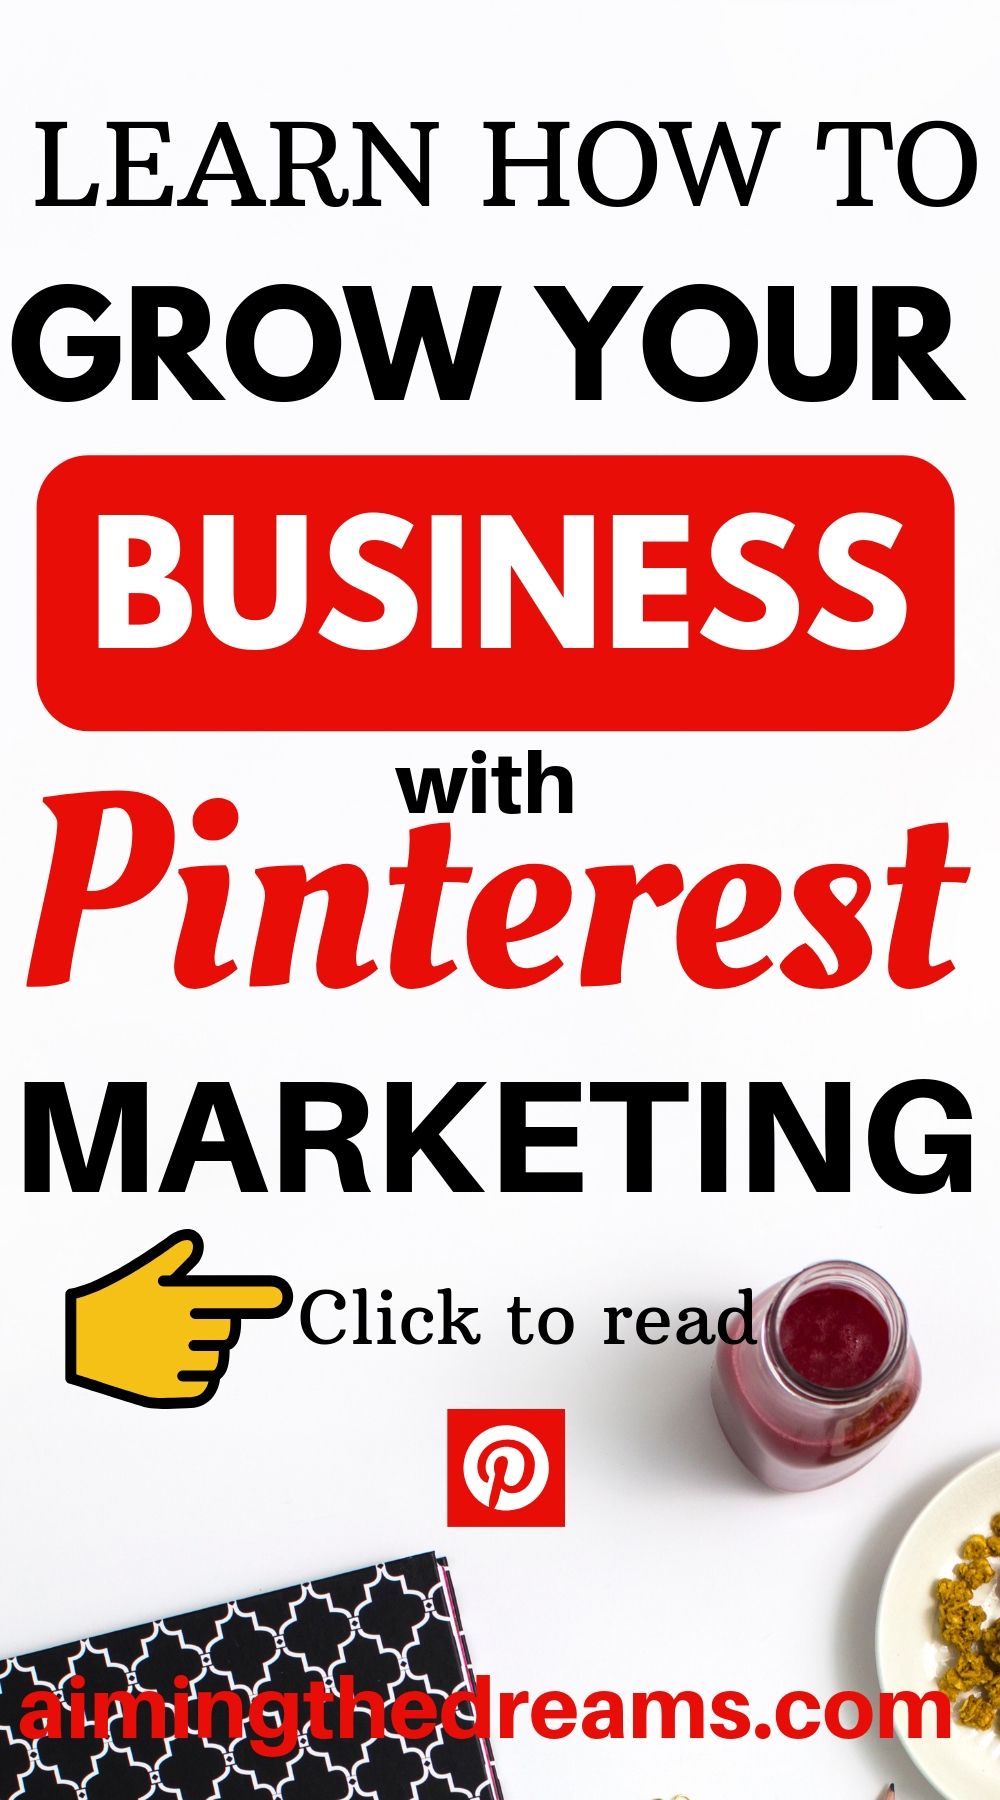 How to grow online business with Pinterest marketing